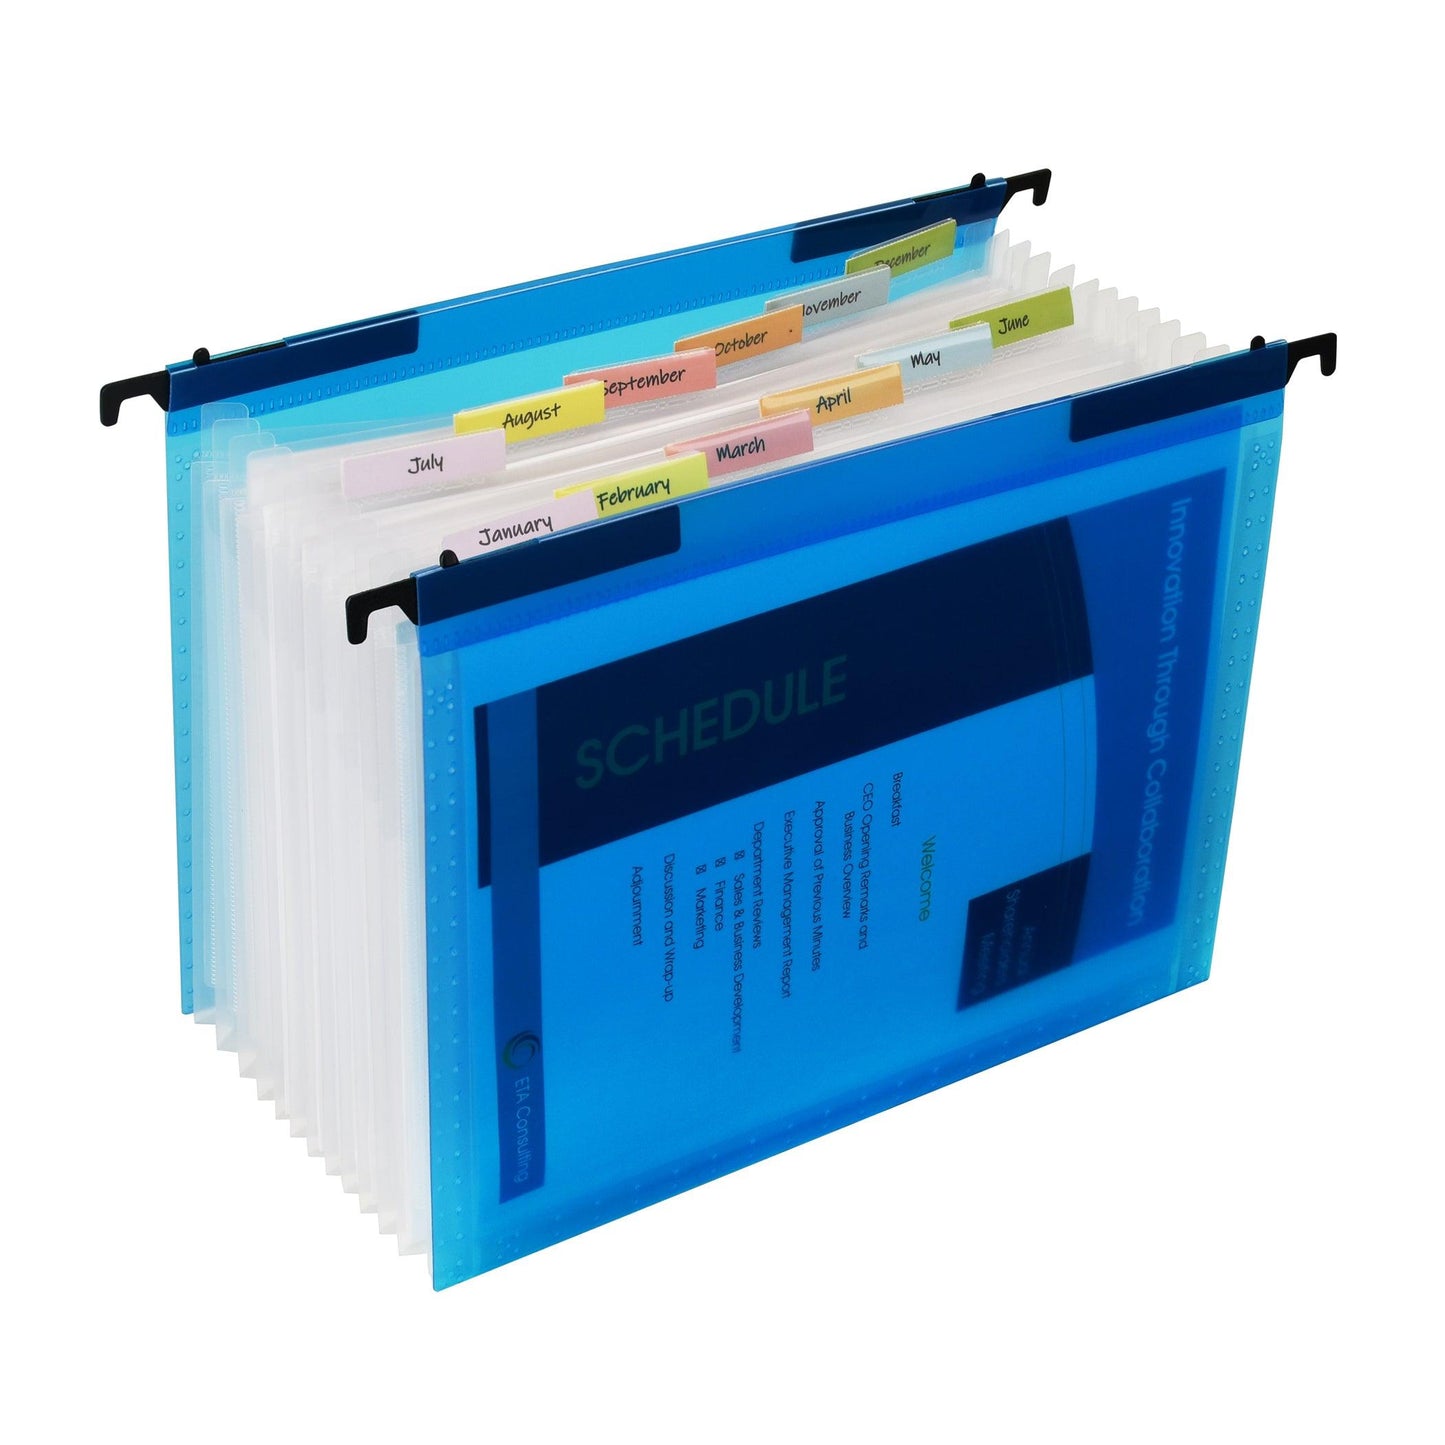 Expanding File Folder, 13-Pocket, Hanging Tabs, Bright Blue, Pack of 3 - Loomini